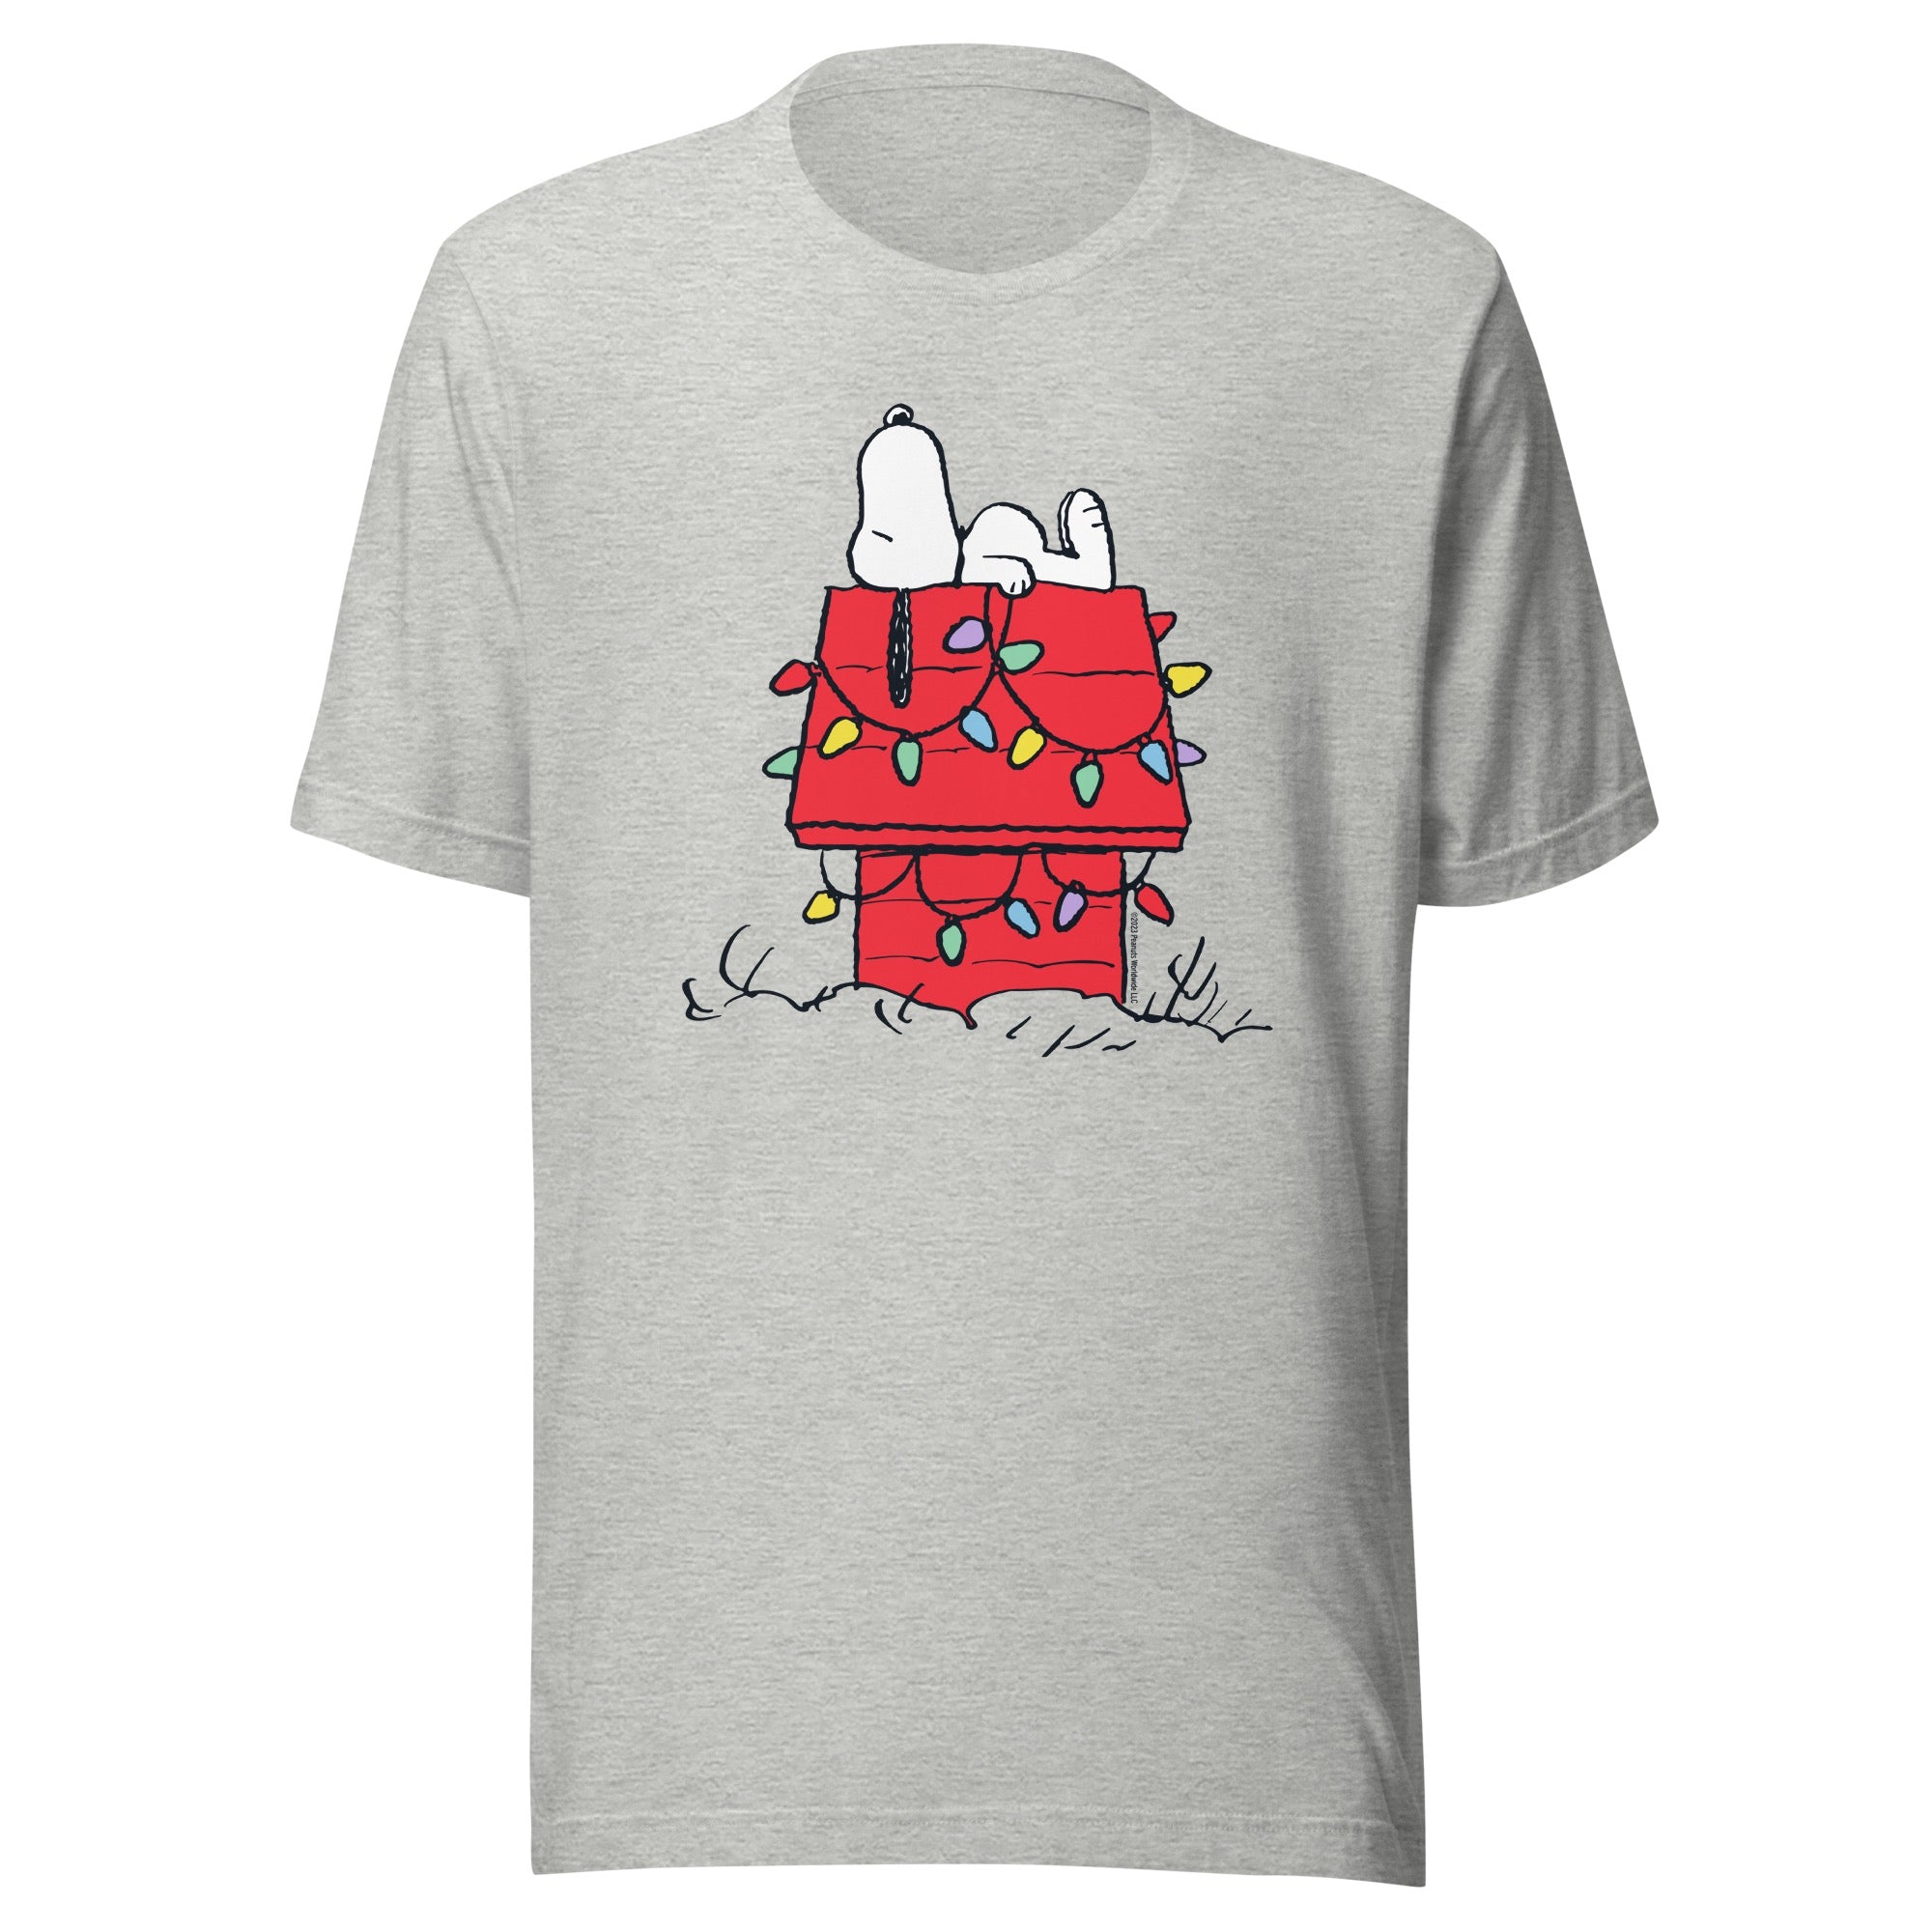 Snoopy House with Lights Adult T-Shirt – The Peanuts Store